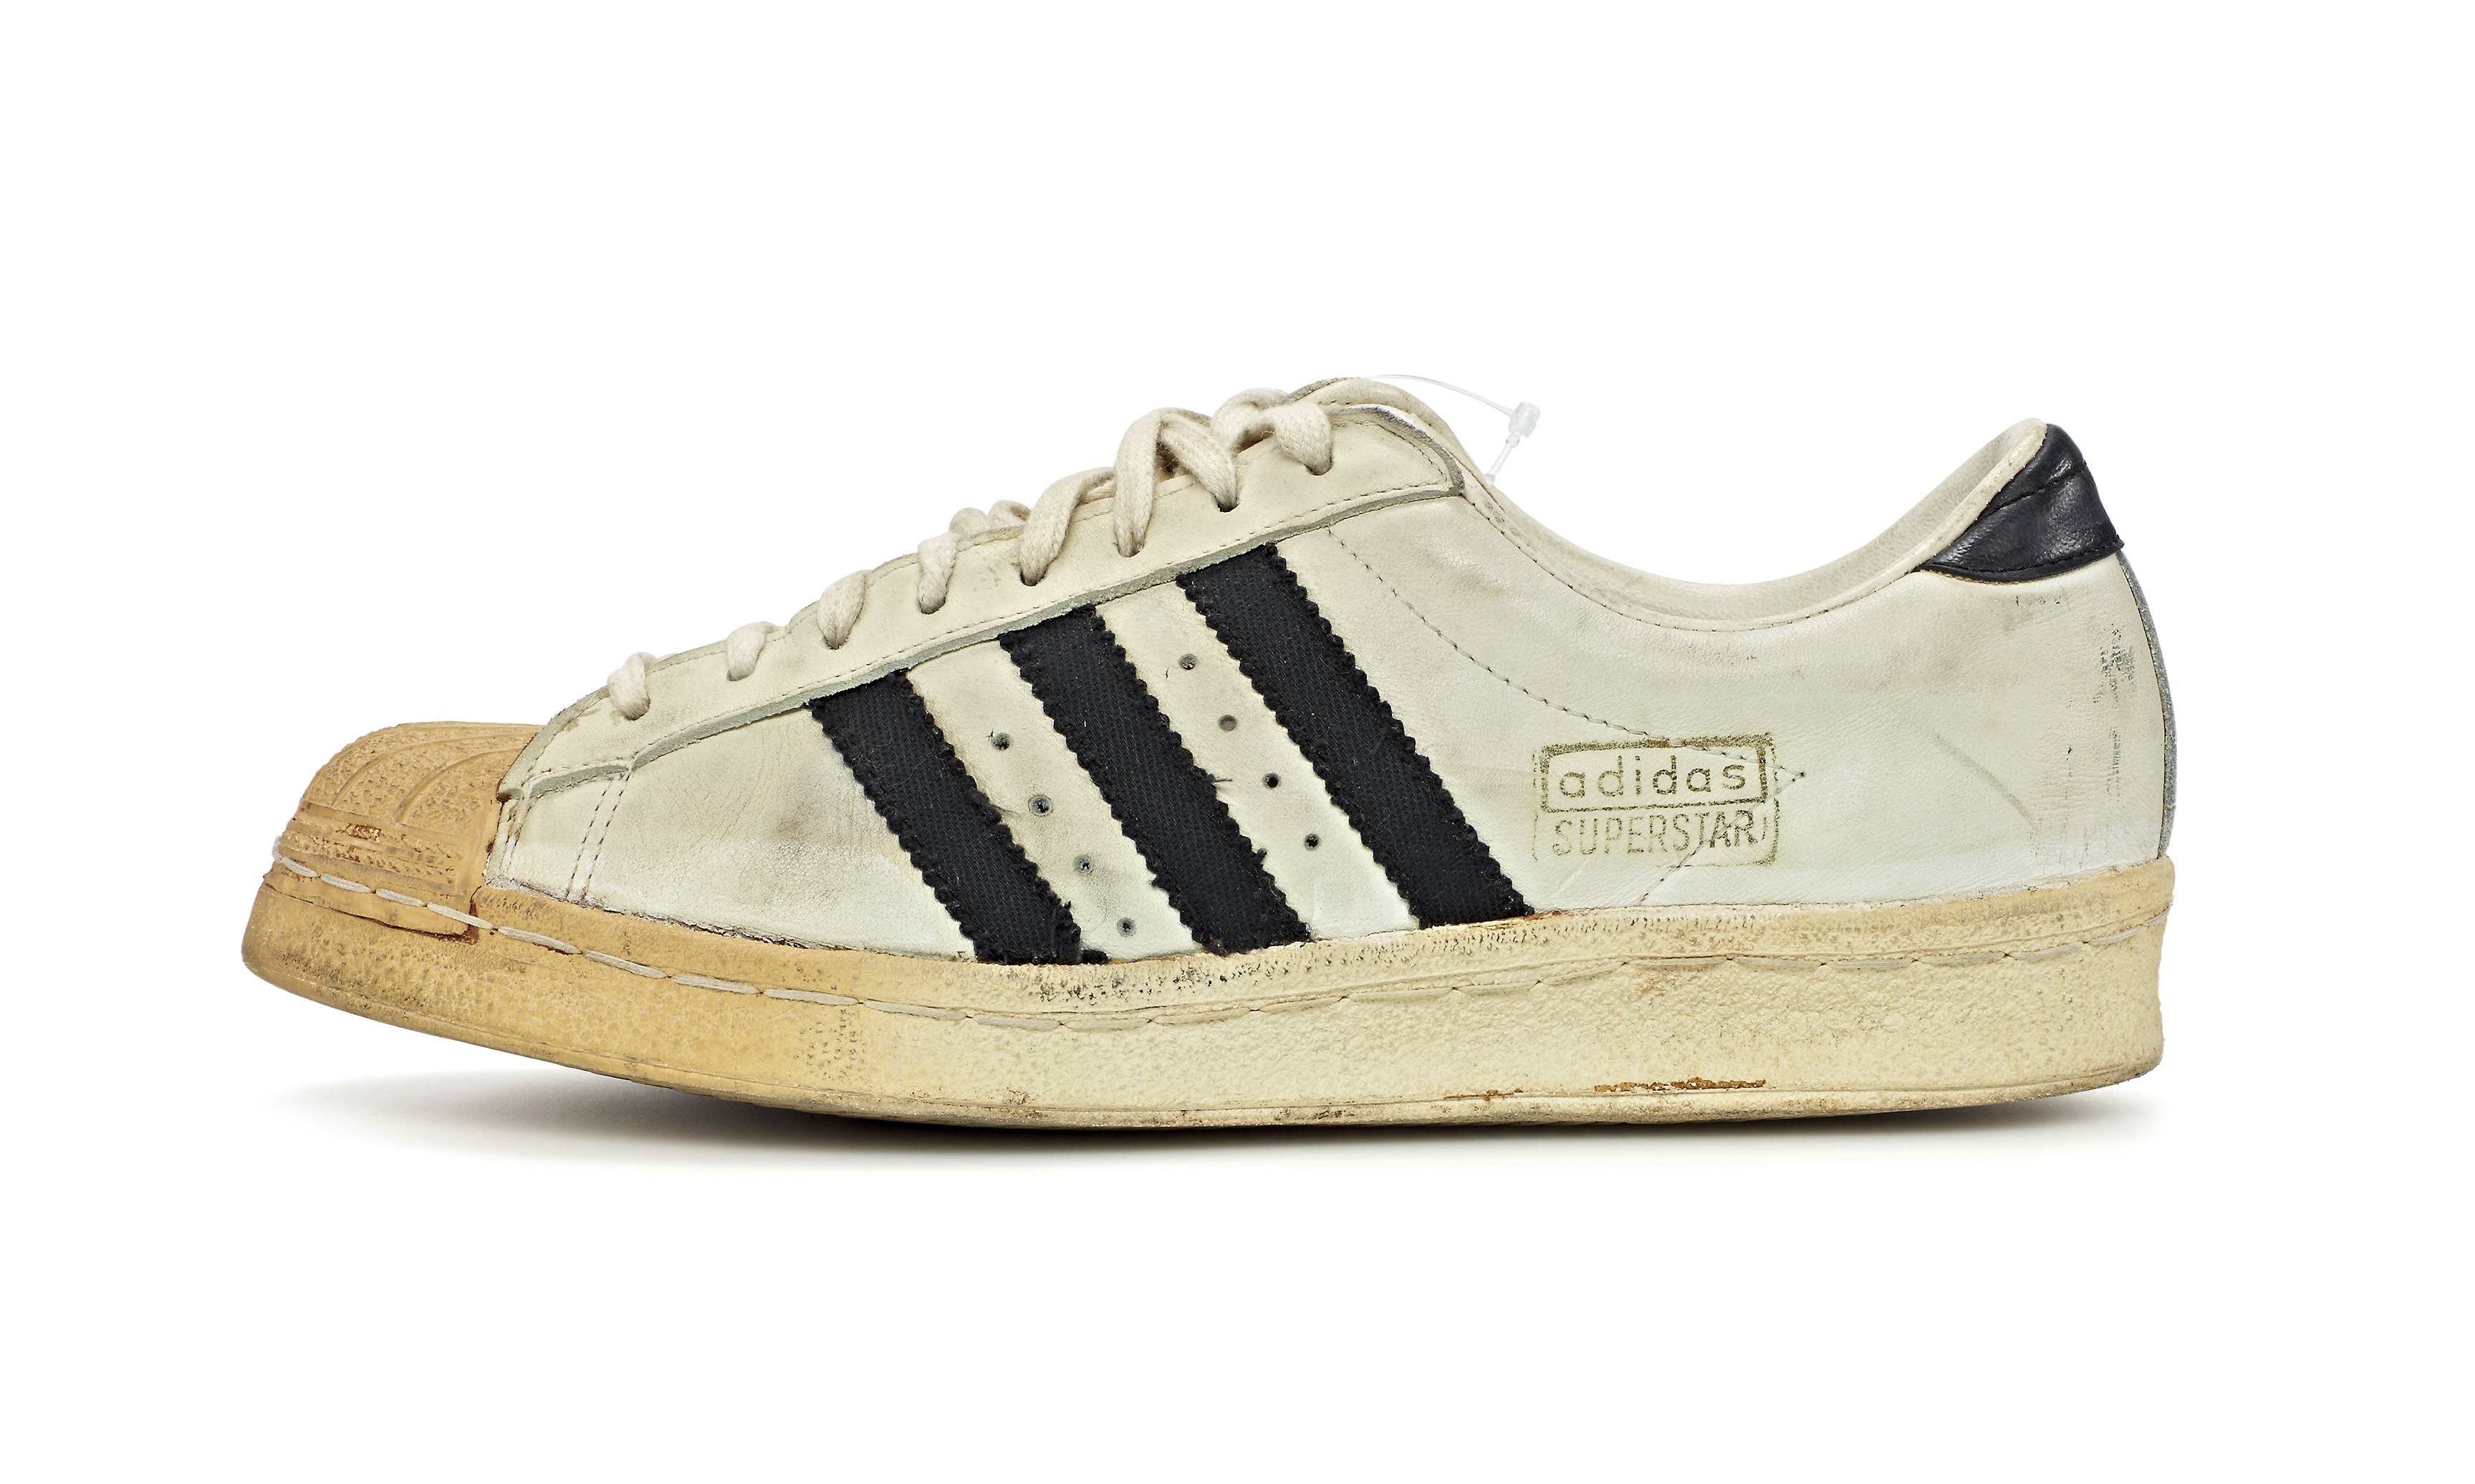 Run DMC x adidas: The Original Collab That Changed Sneakers Forever